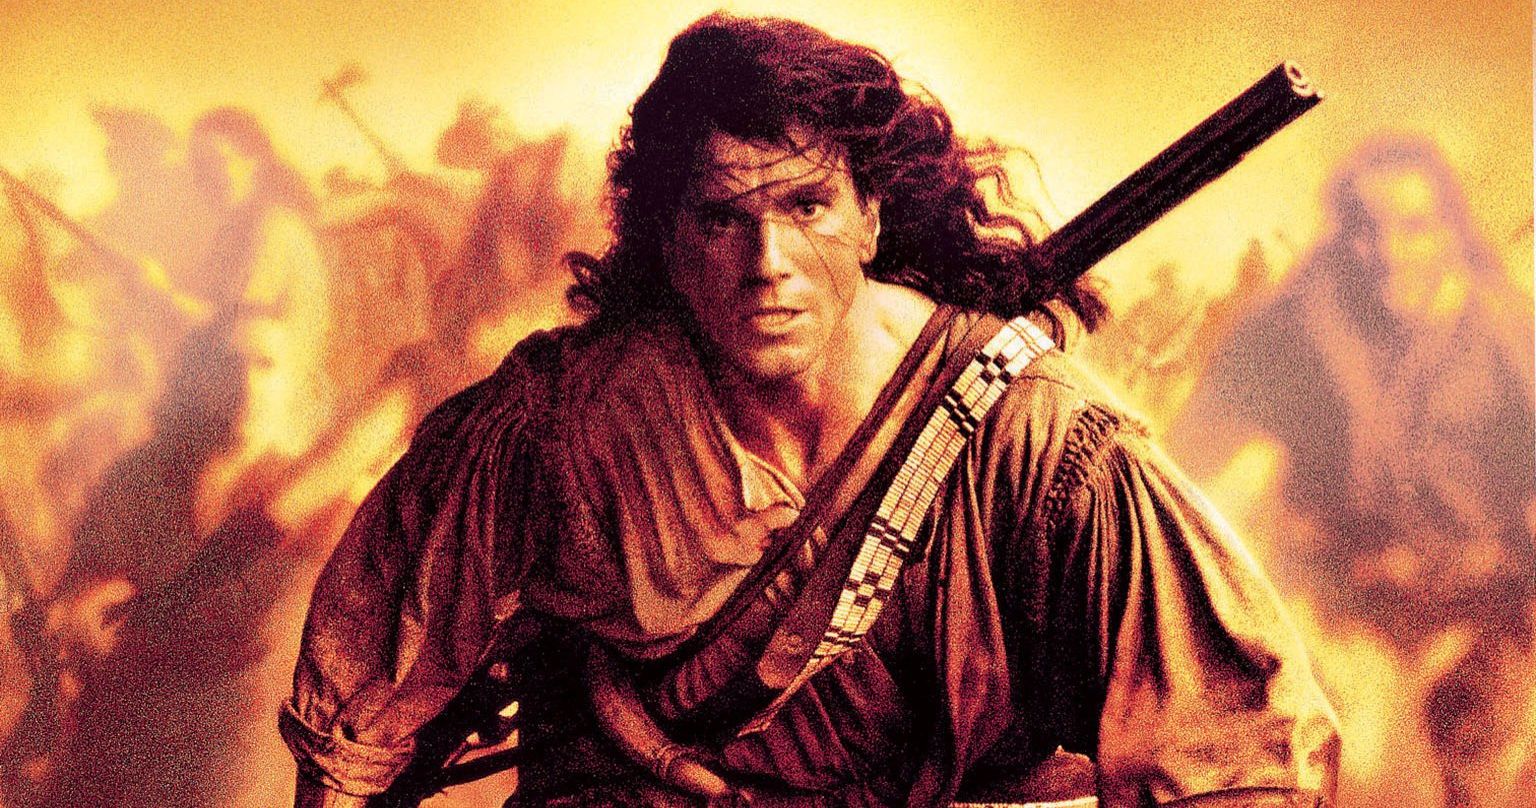 The Last of the Mohicans Soundtrack Gets Limited Colored Vinyl Release in June